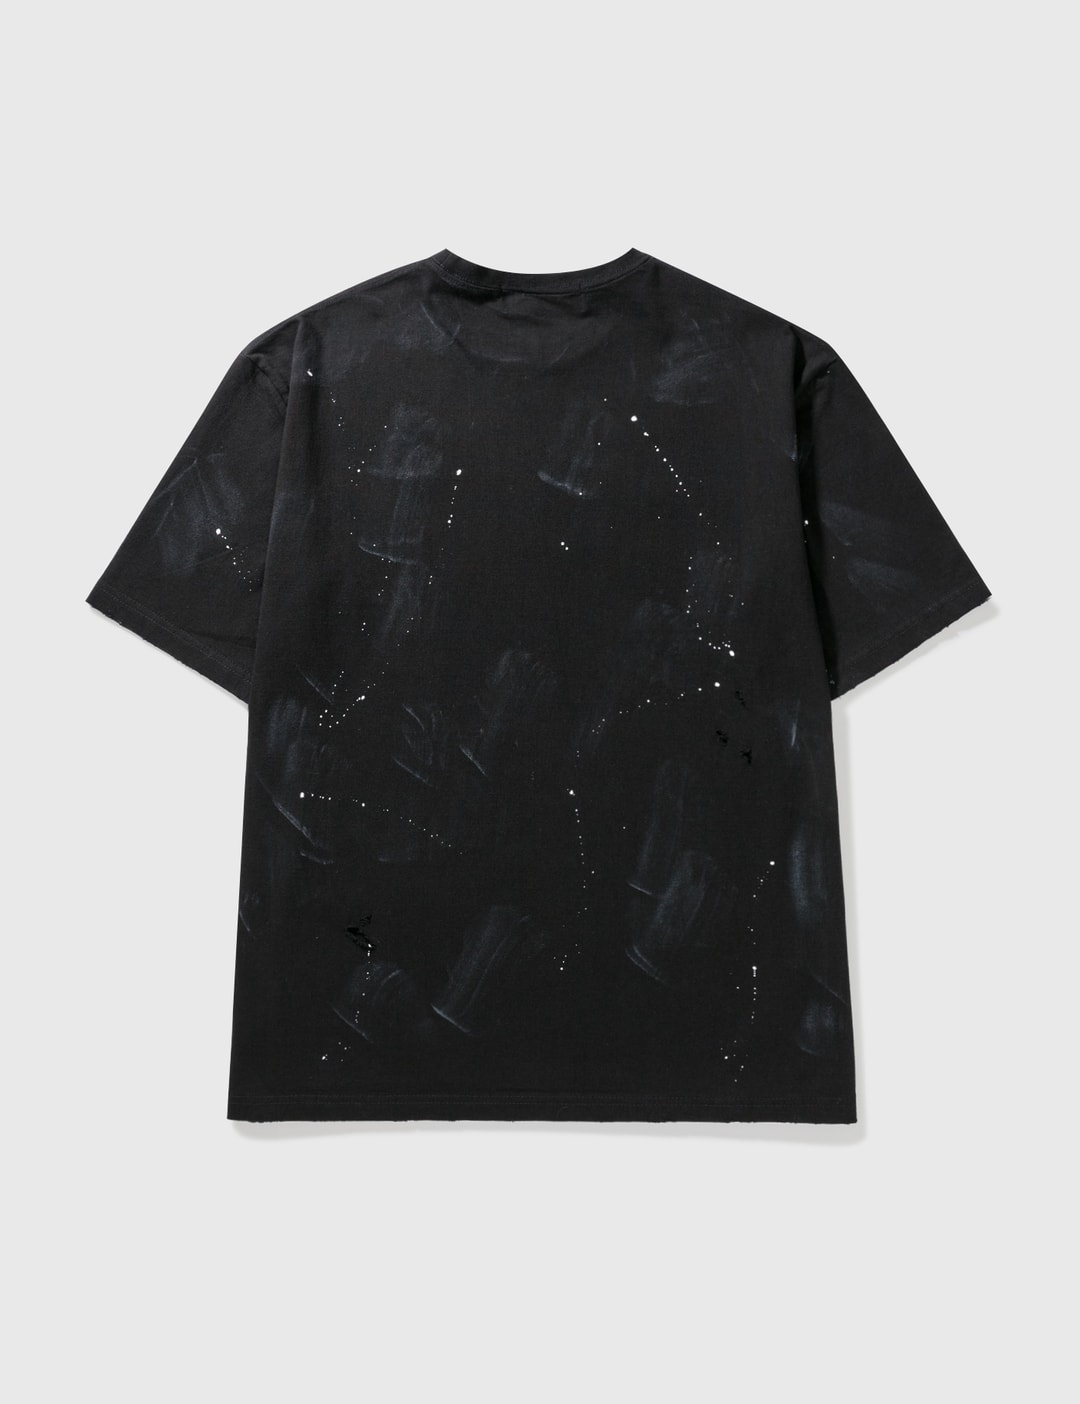 Someit - S.P T-shirt | HBX - Globally Curated Fashion and Lifestyle by ...